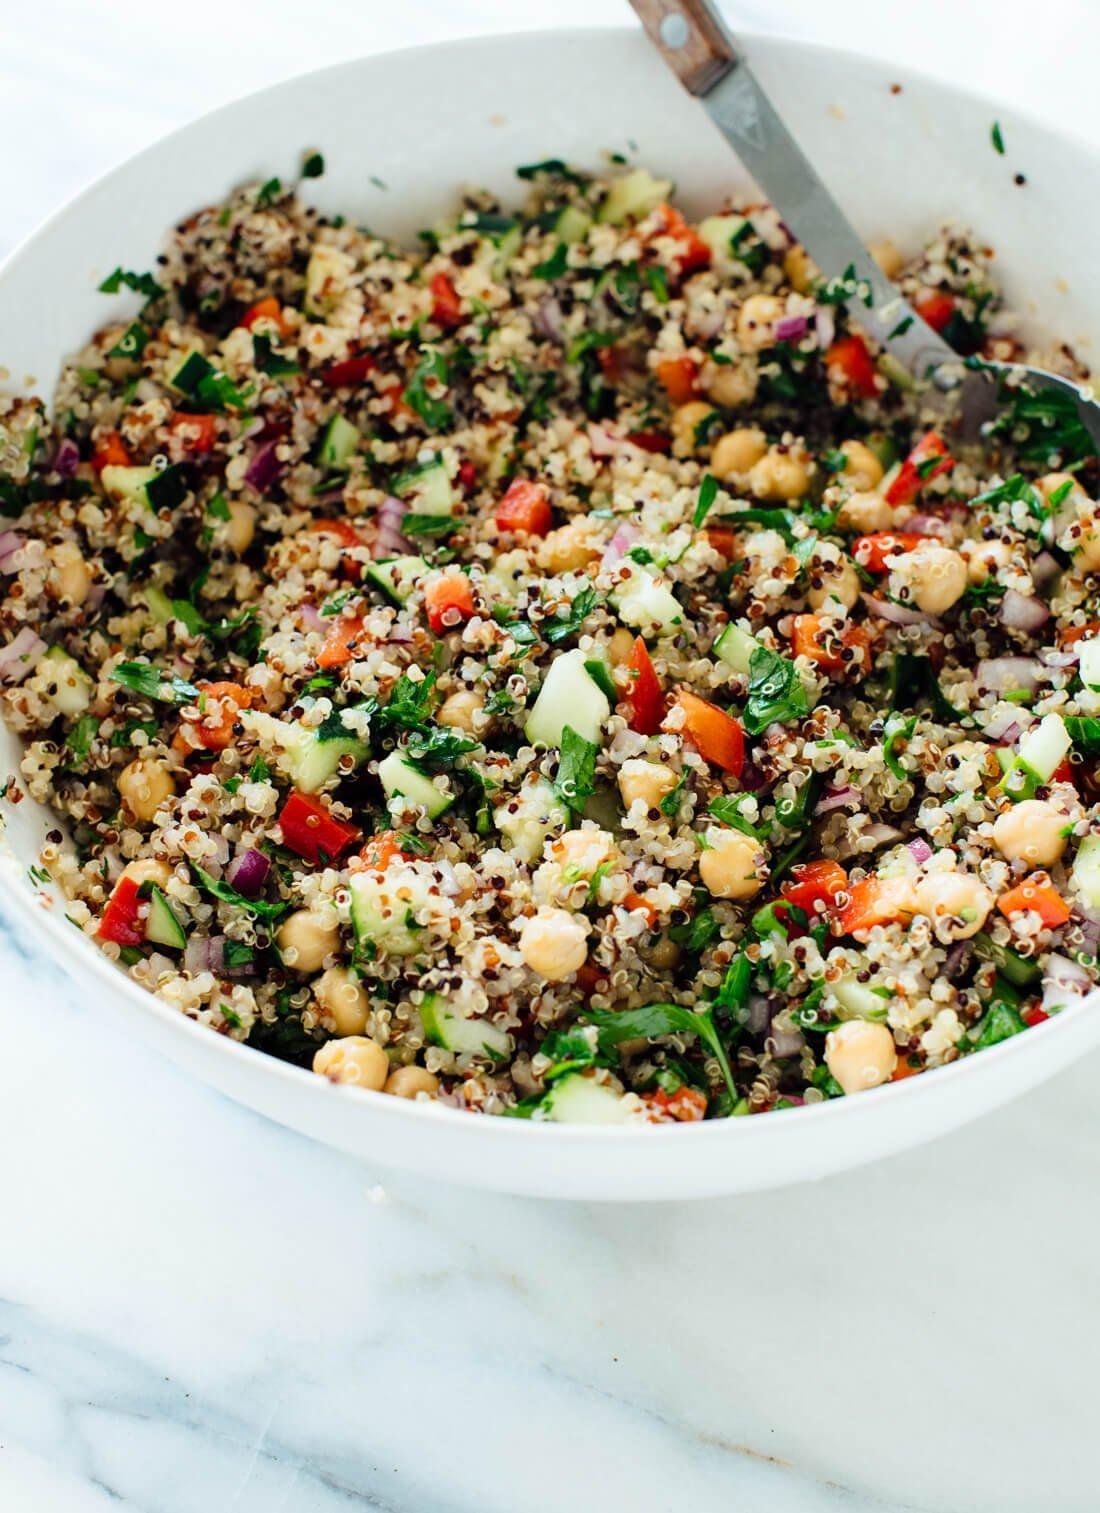 Delicious and Nutritious: Try This Simple and Healthy Quinoa Salad Recipe Today!